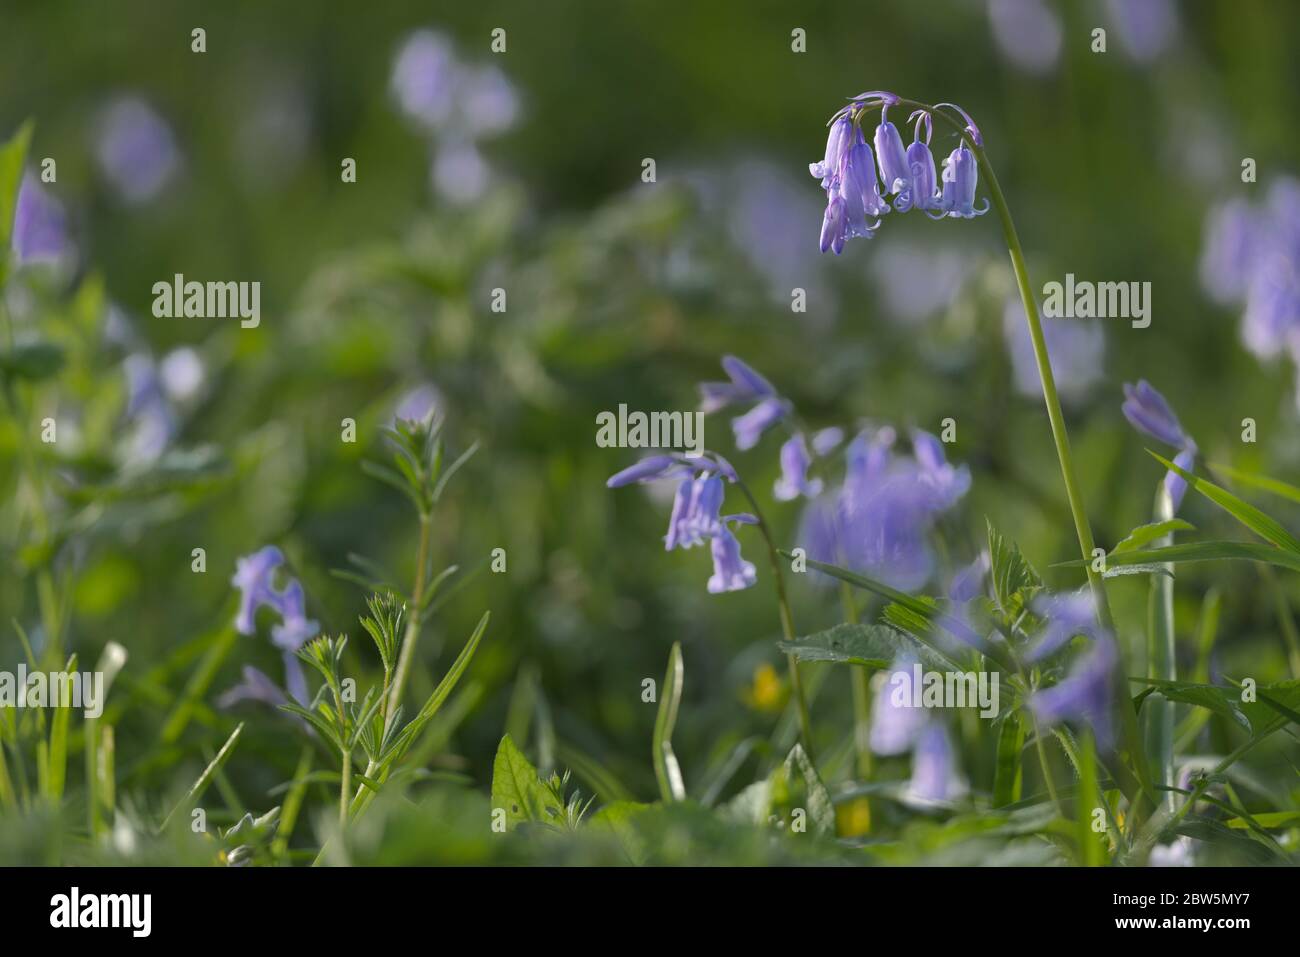 british bluebell close up with a blurred background Stock Photo